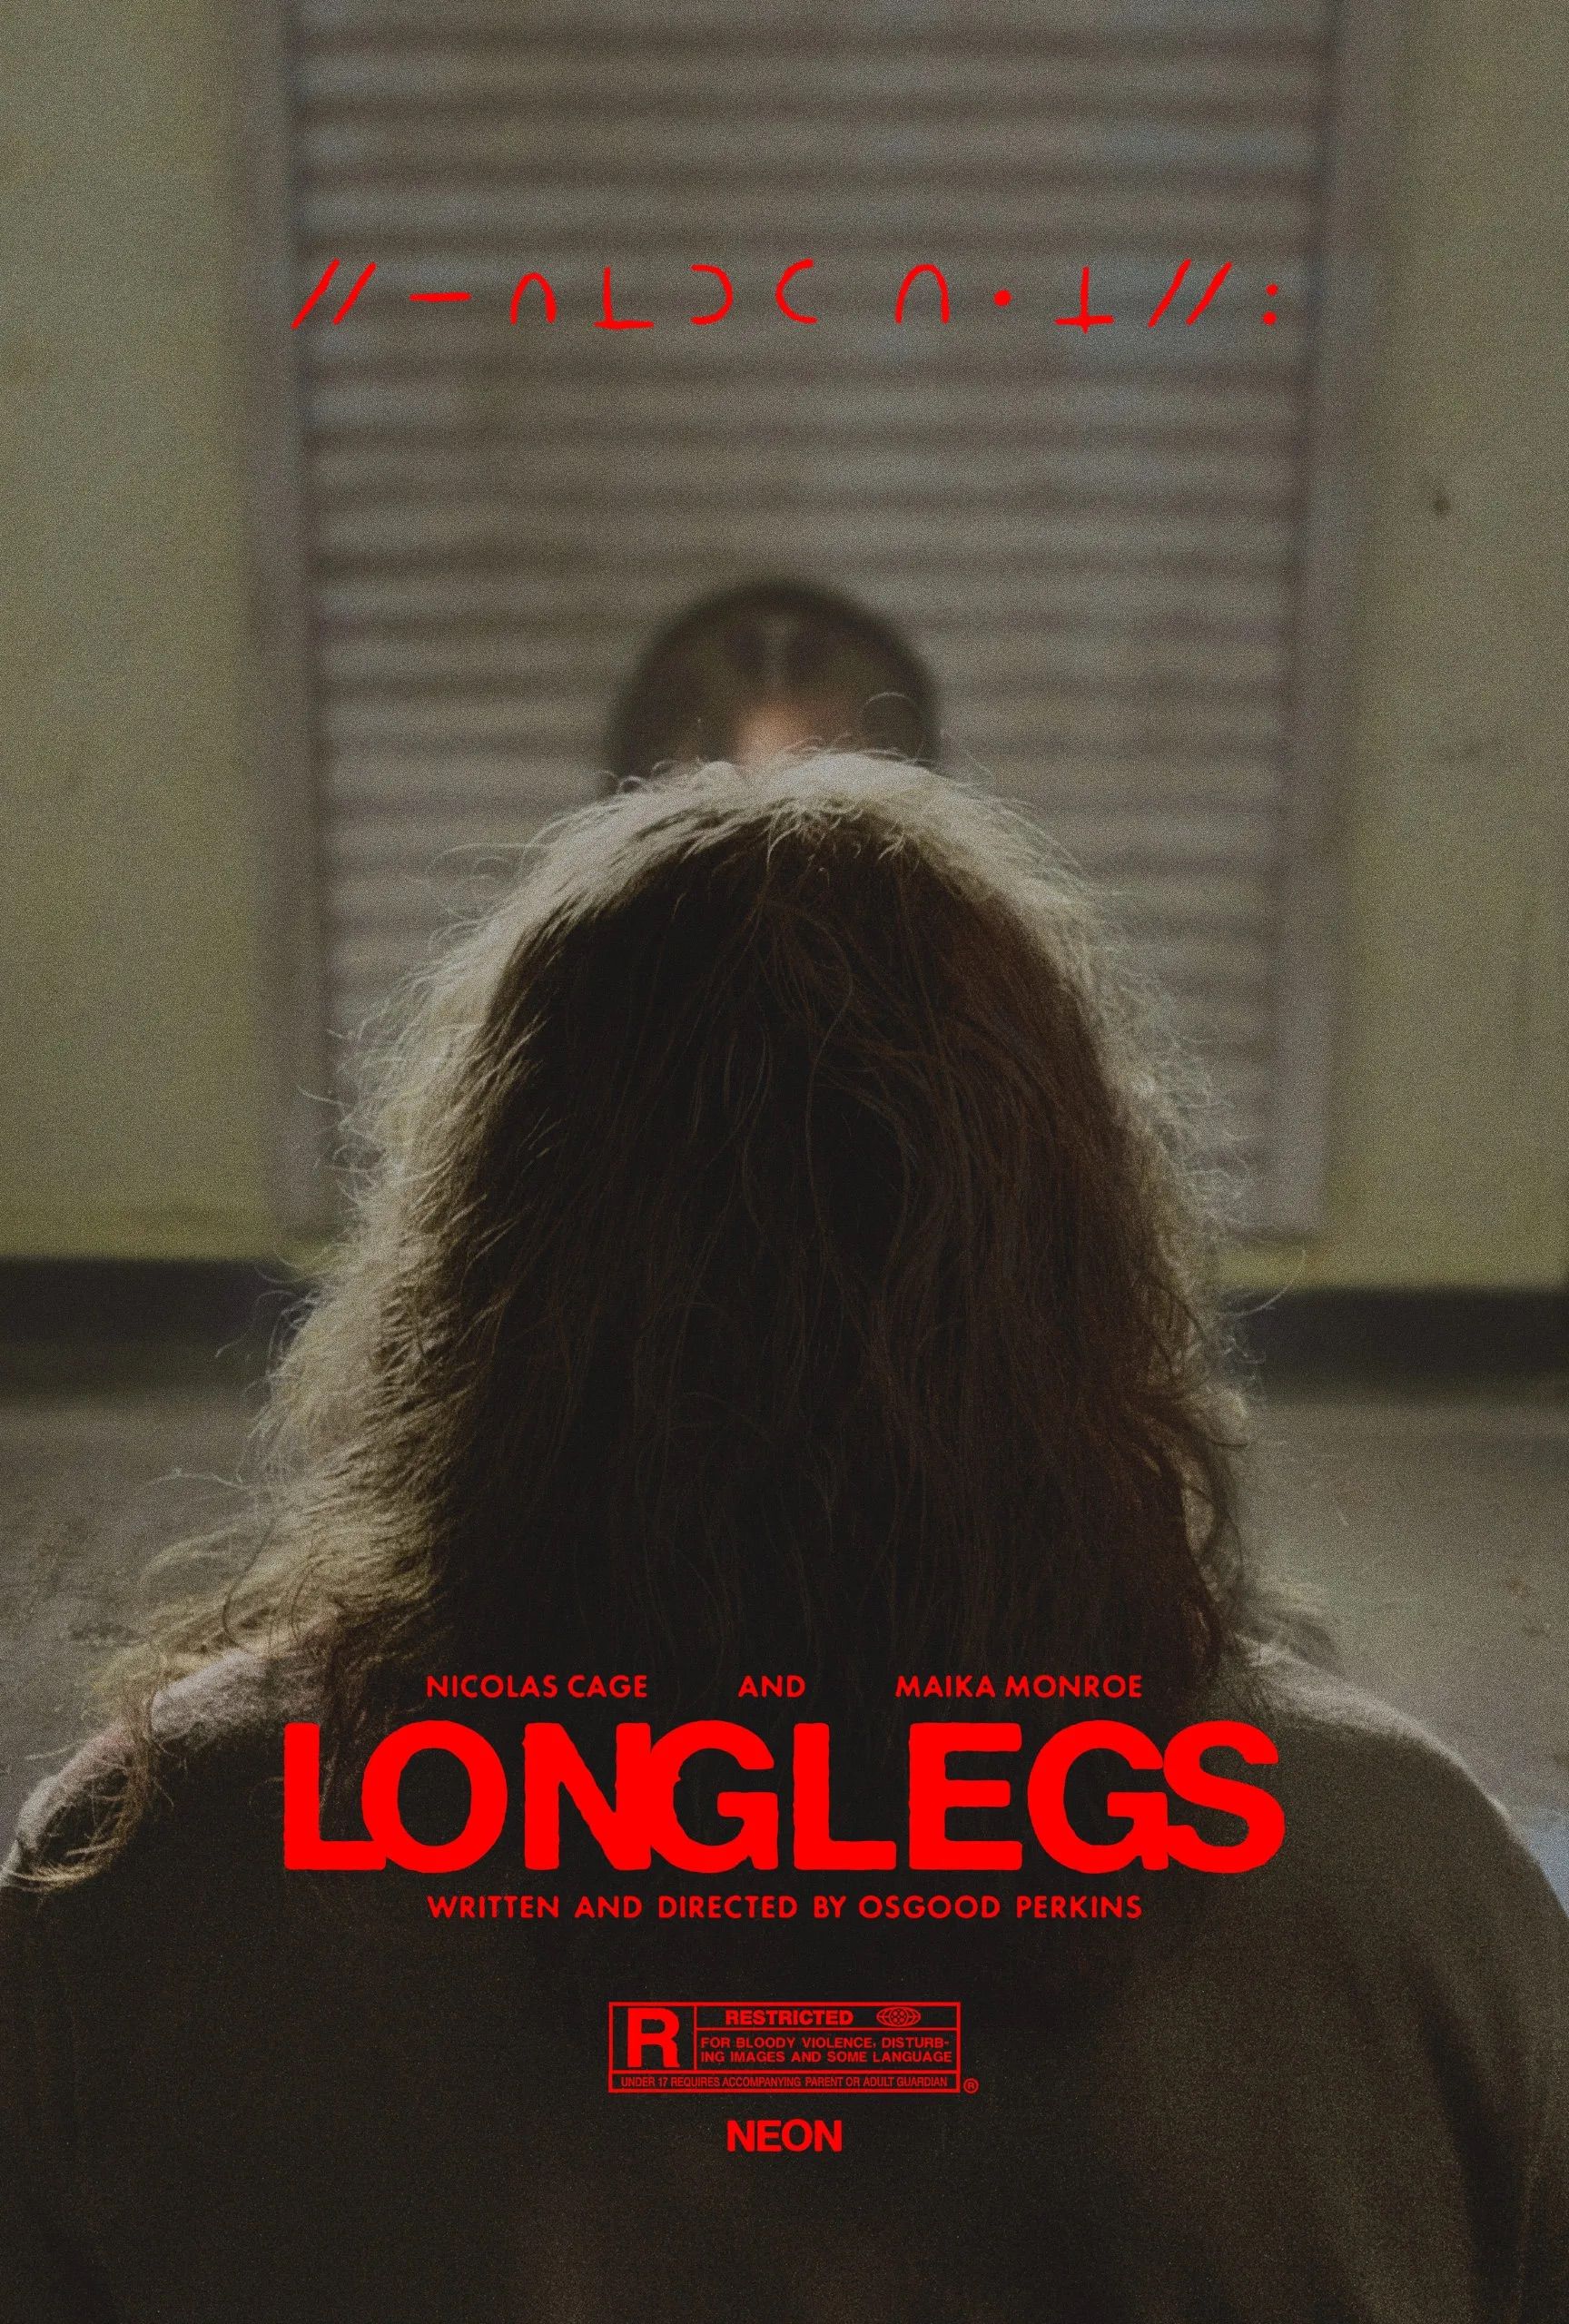 The back of Nicolas Cage's head as he's seated across from a girl on a poster for Longlegs